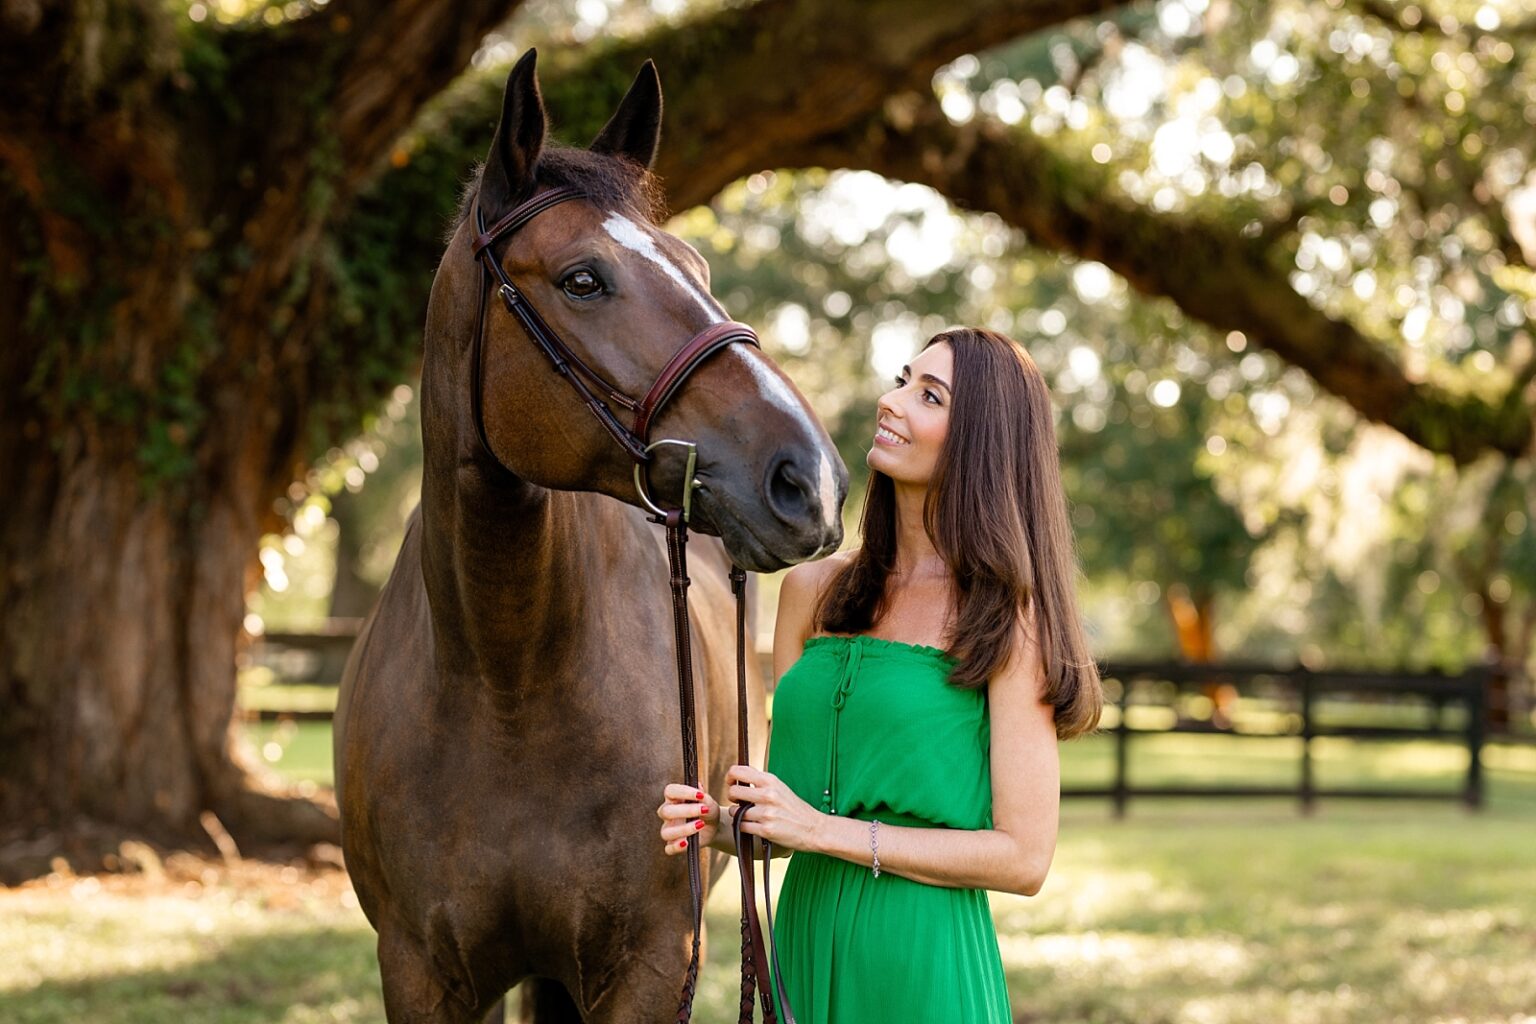 Best horse photographer in Tallahassee takes photos of woman in gorgeous green dress with her Warmblood horse underneath historic oak trees. Posing ideas for horse and rider photoshoot.